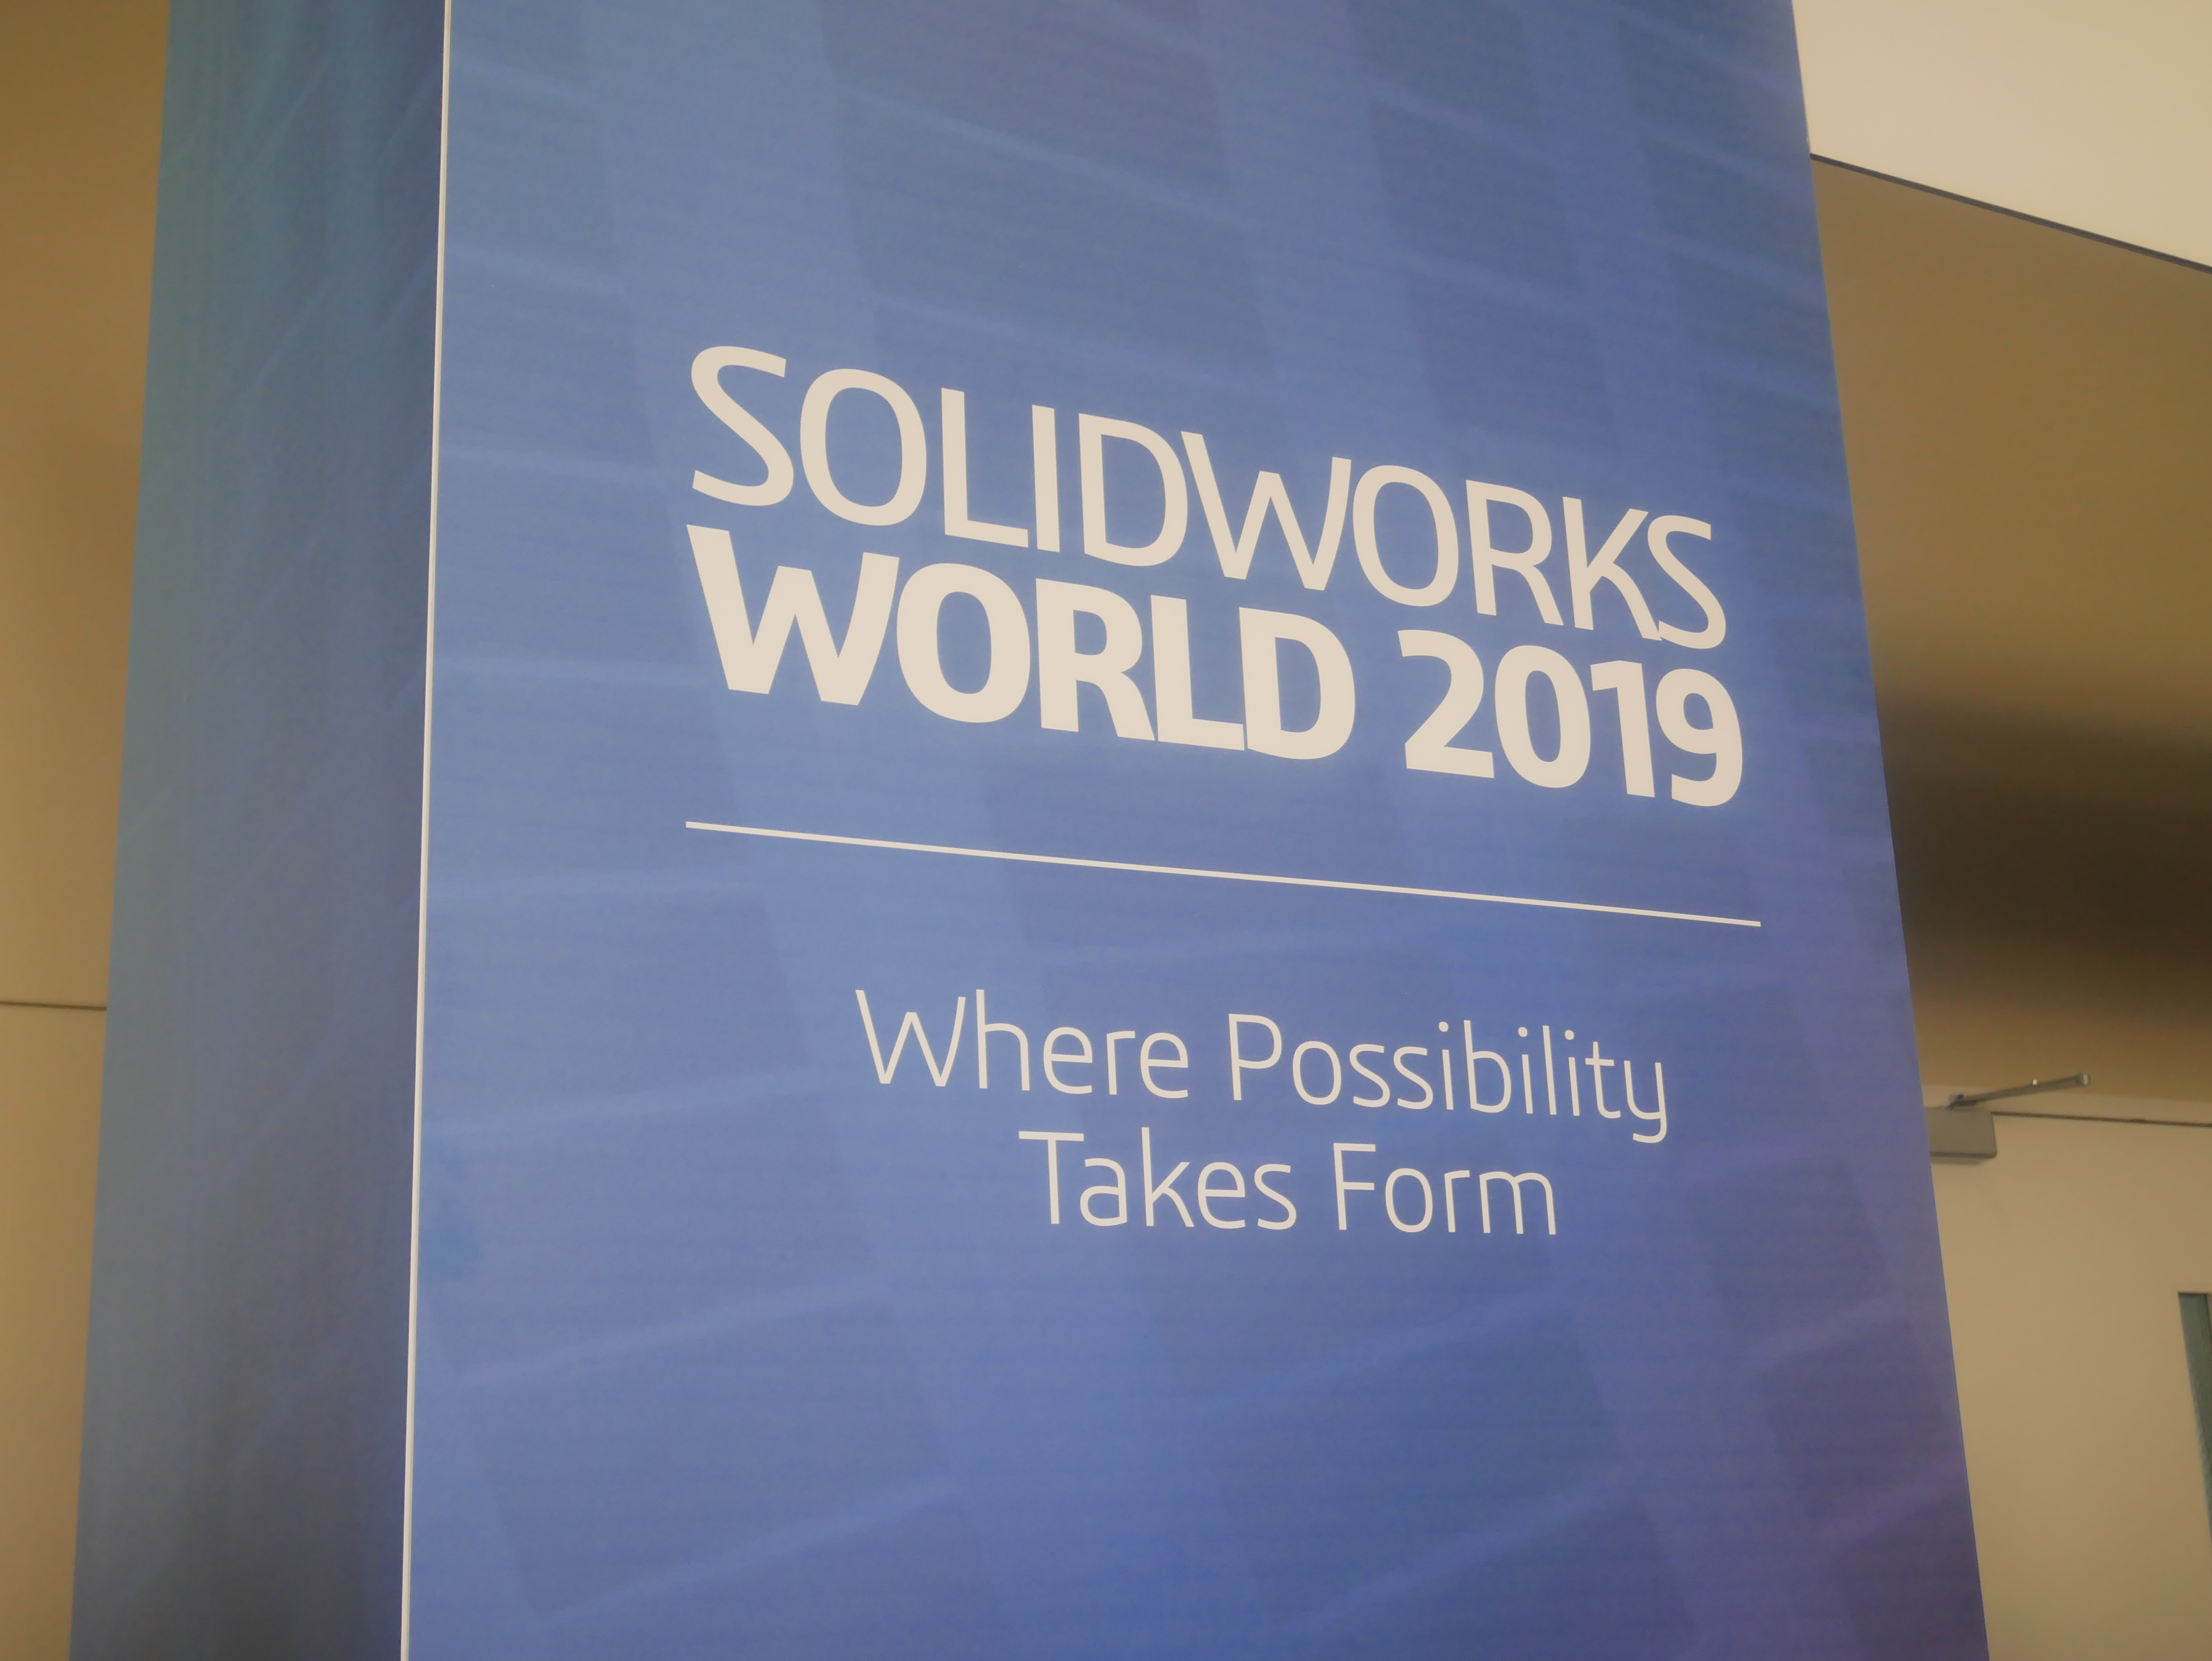 Signage at SOLIDWORKS World 2019. Photo by Tia Vialva.